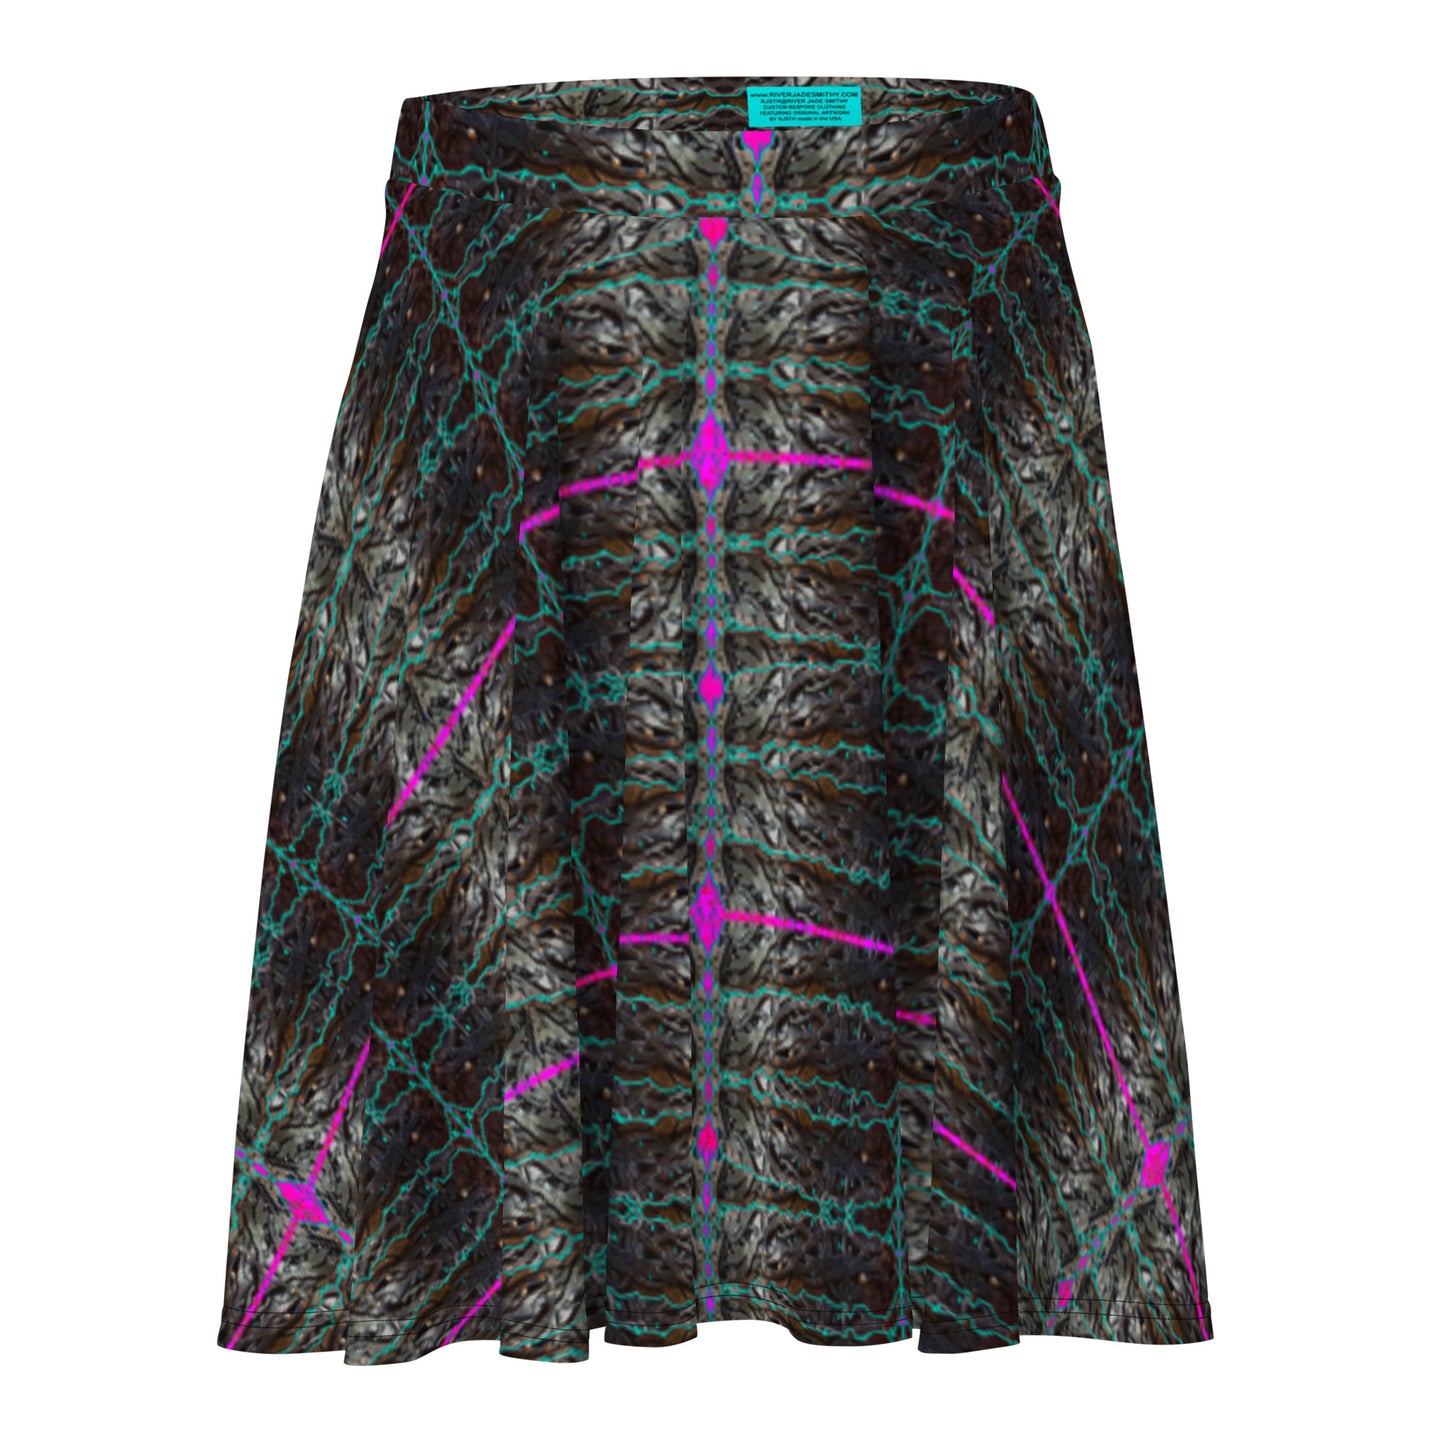 Skater Skirt (Her/They)(Rind#8 Tree Link) RJSTH@Fabric#8 RJSTHW2021 RJS